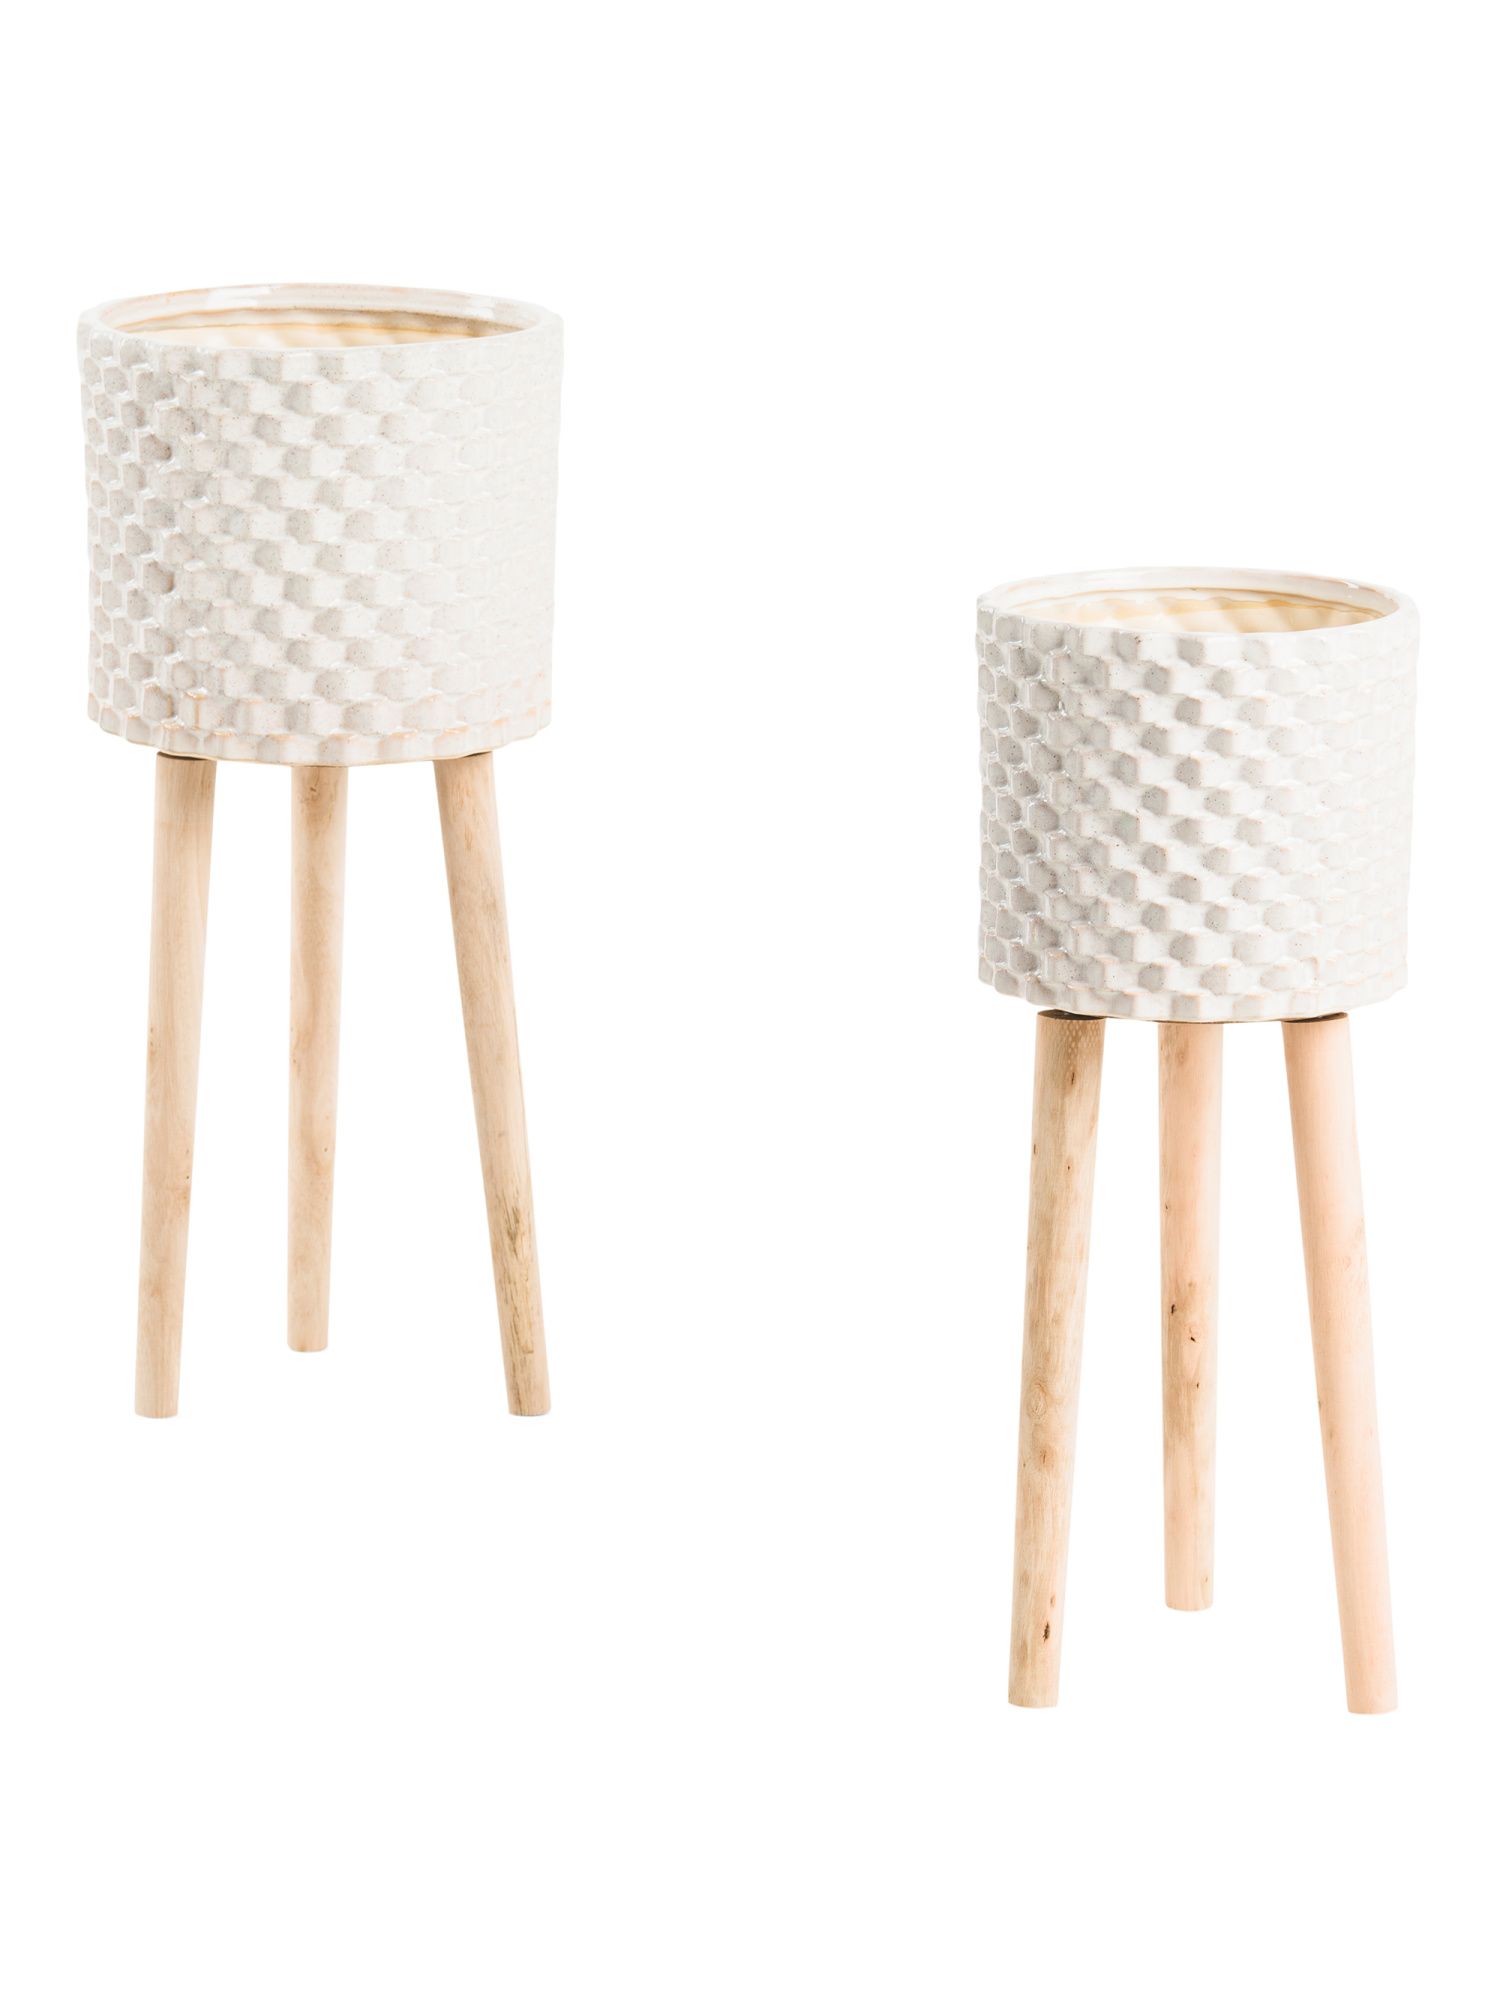 Set Of 2 Ceramic Textured Planters With Wooden Legs | TJ Maxx